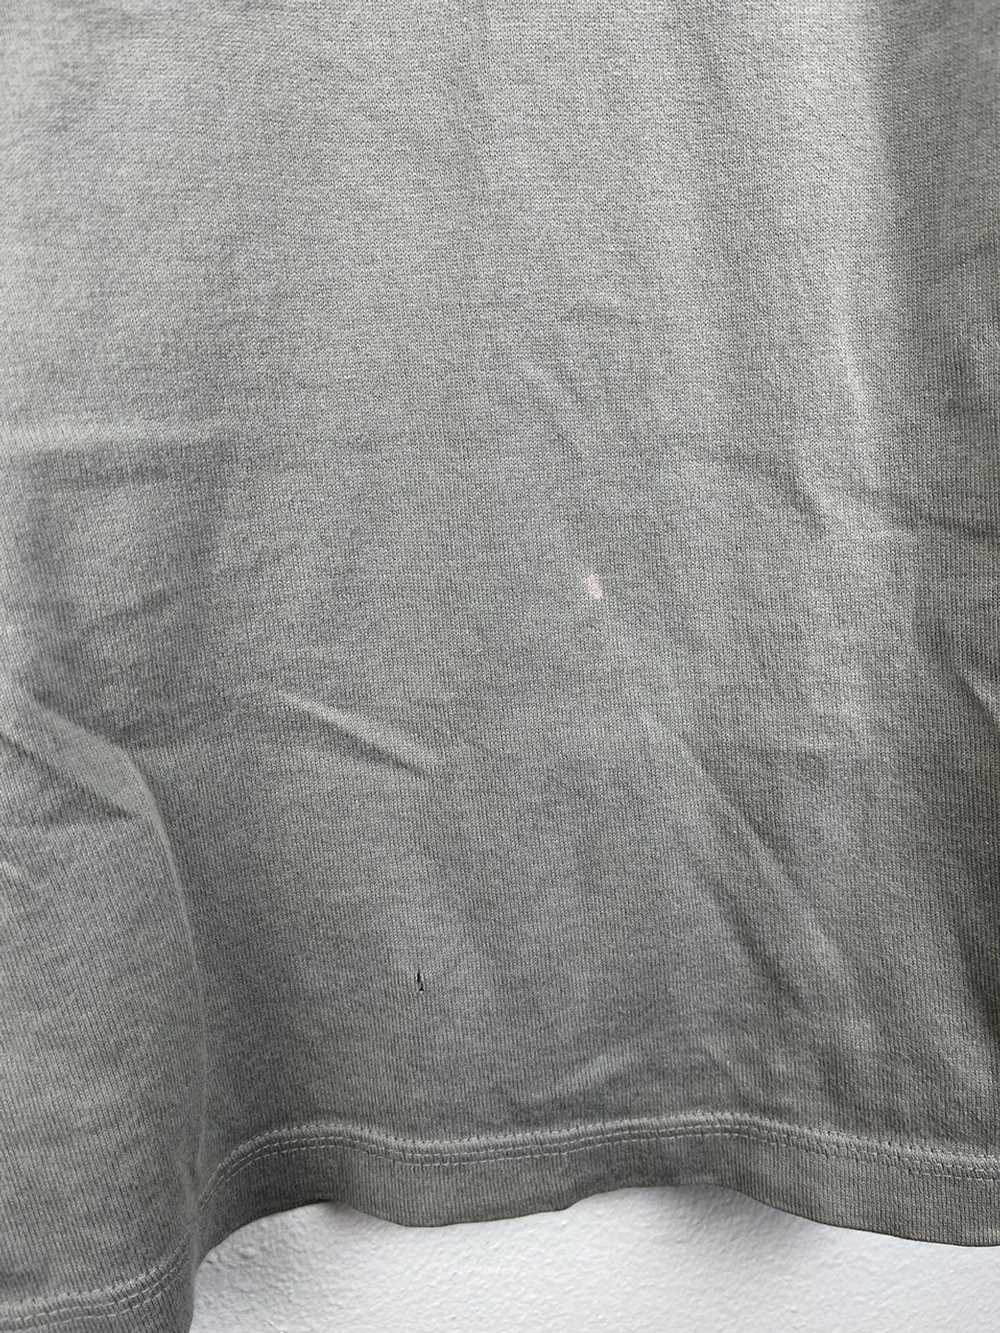 Undercover Undercover Tee - image 2